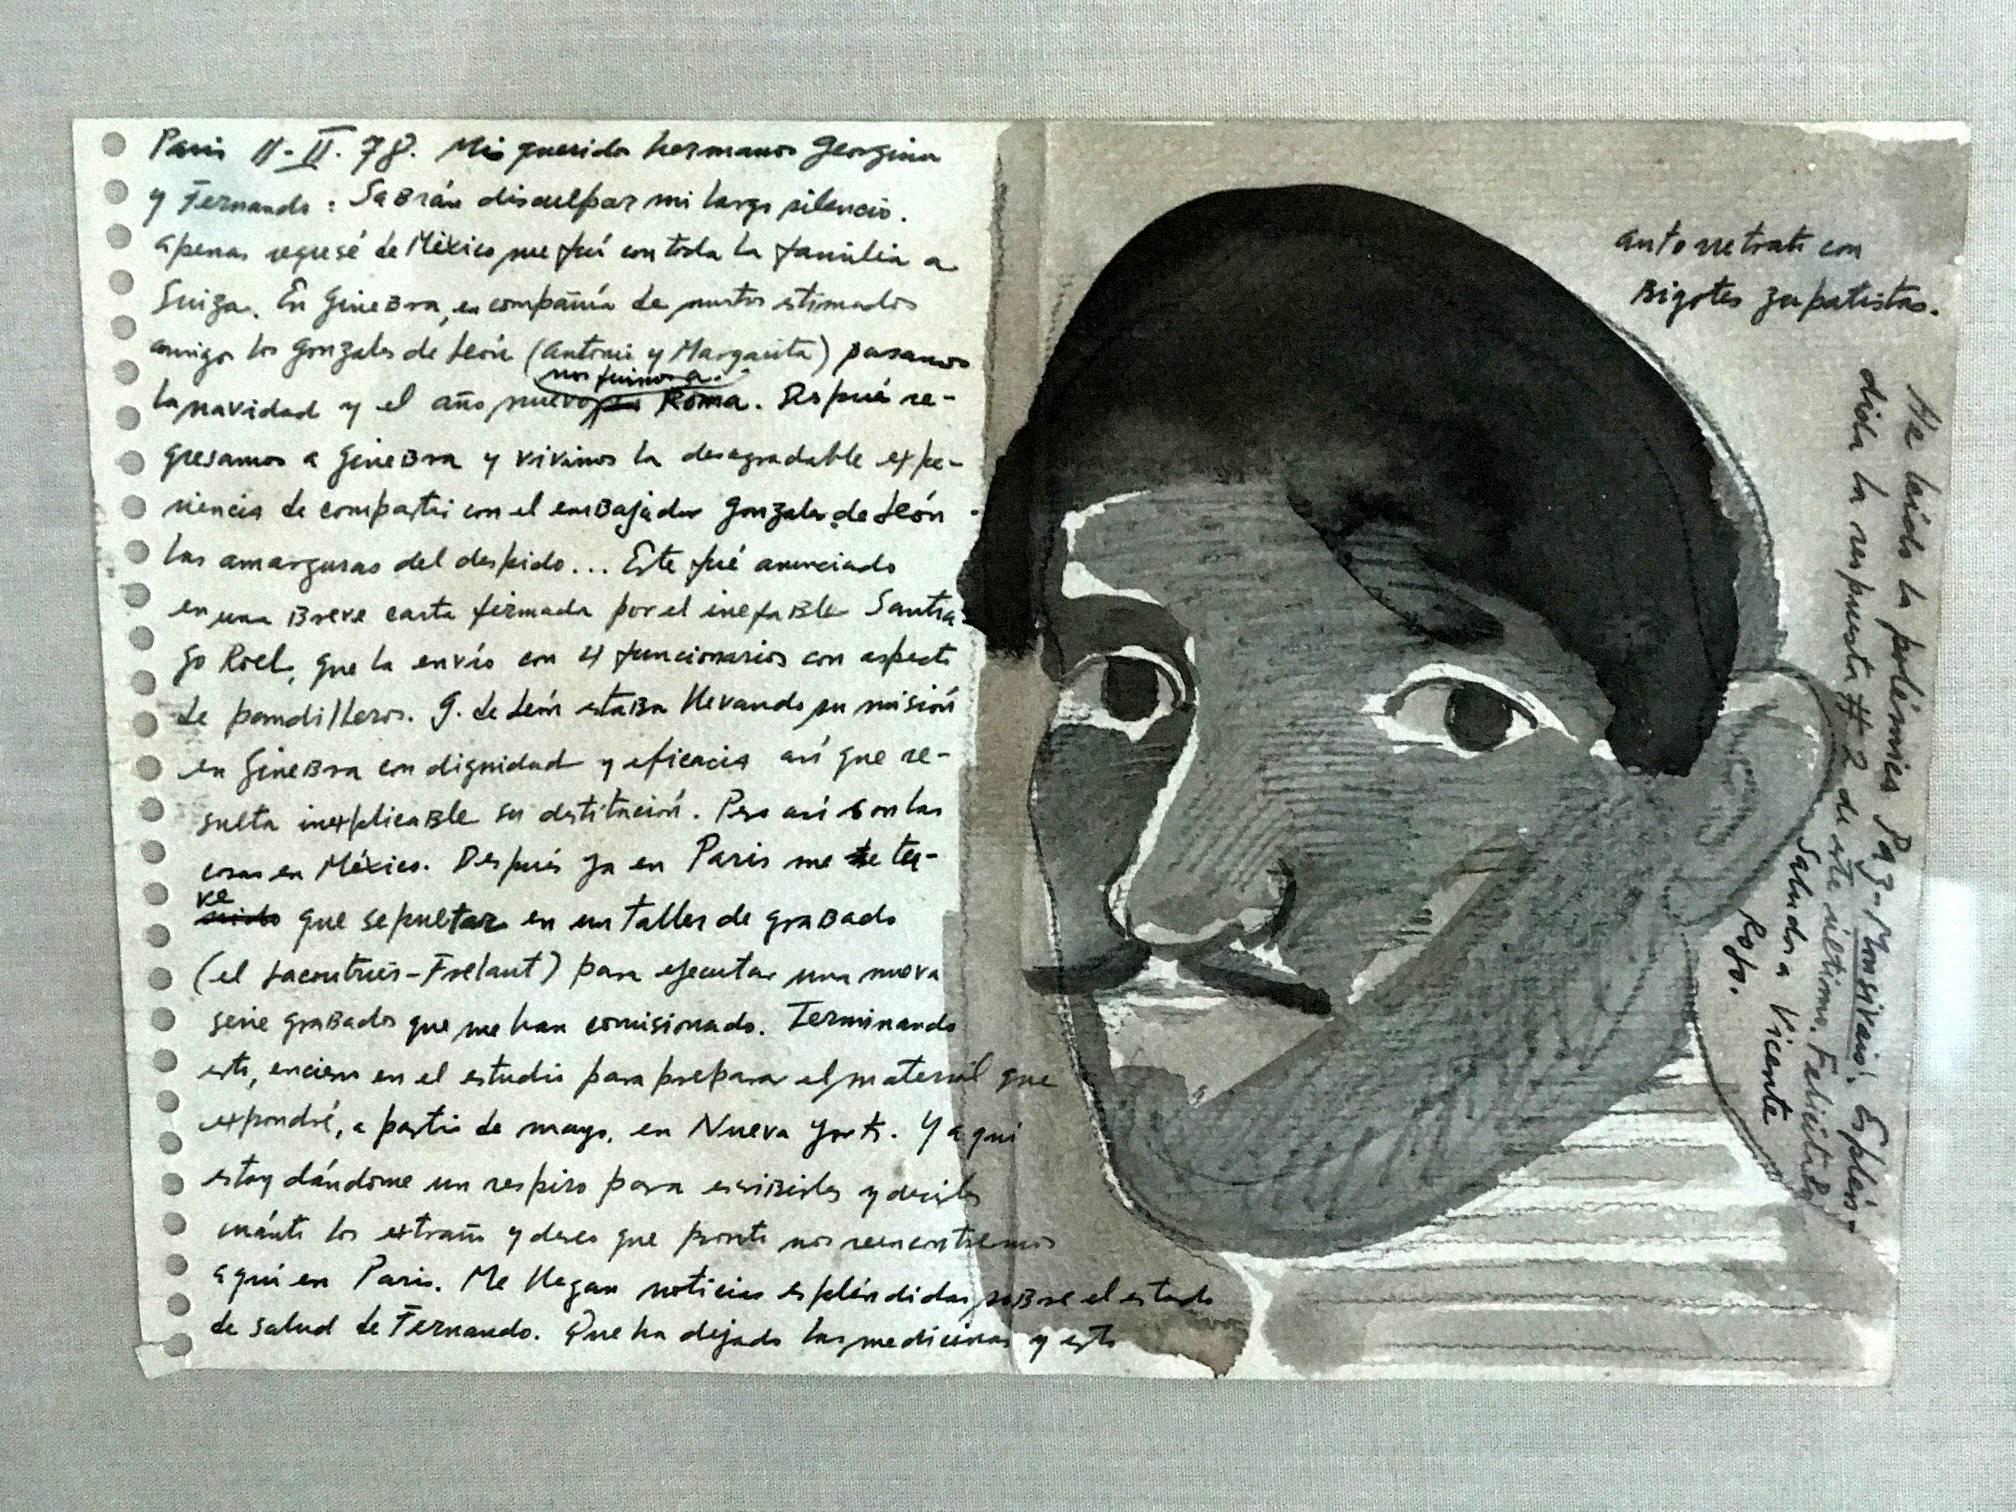 Two small drawings and writings made in Paris in 1978 by Mexican artist Jose Luis Cuevas. They were framed together as a pair. Each features a figurative drawings, one of which might be a self-portrait of the artist, and very dense diary-like